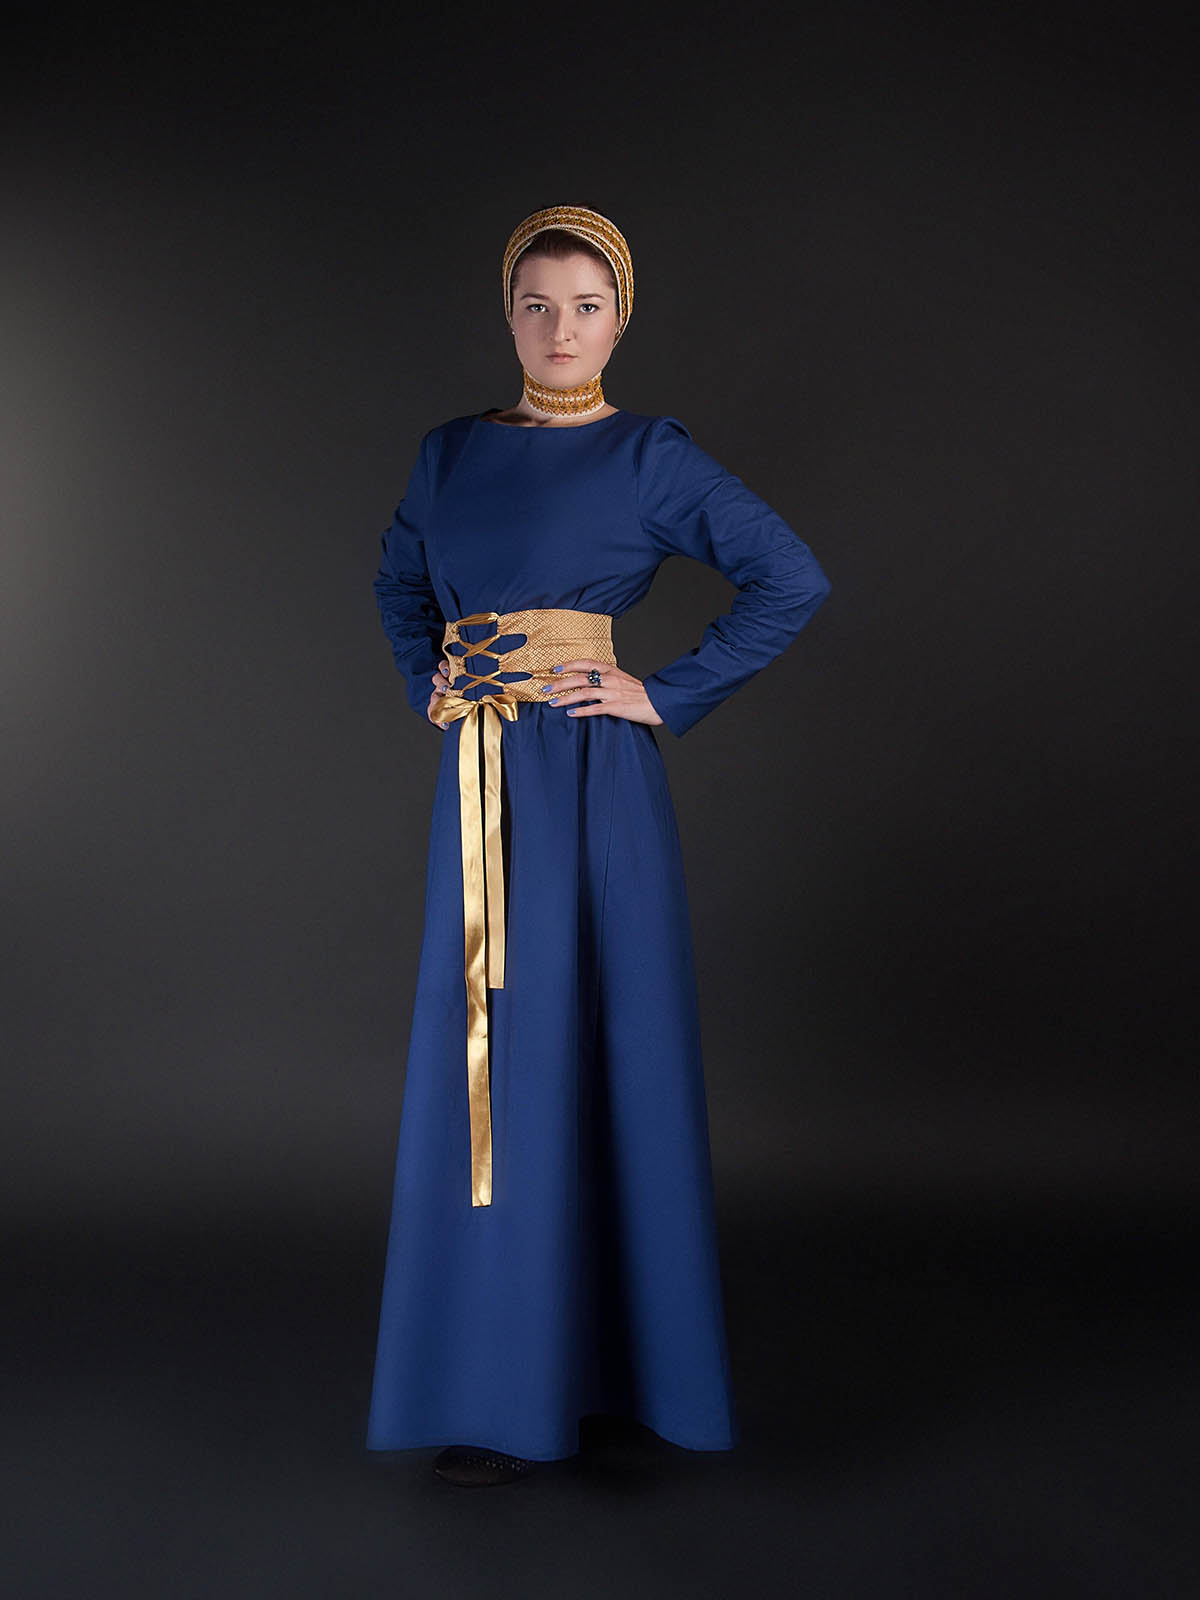 Medieval style dress with wide belt - new item!